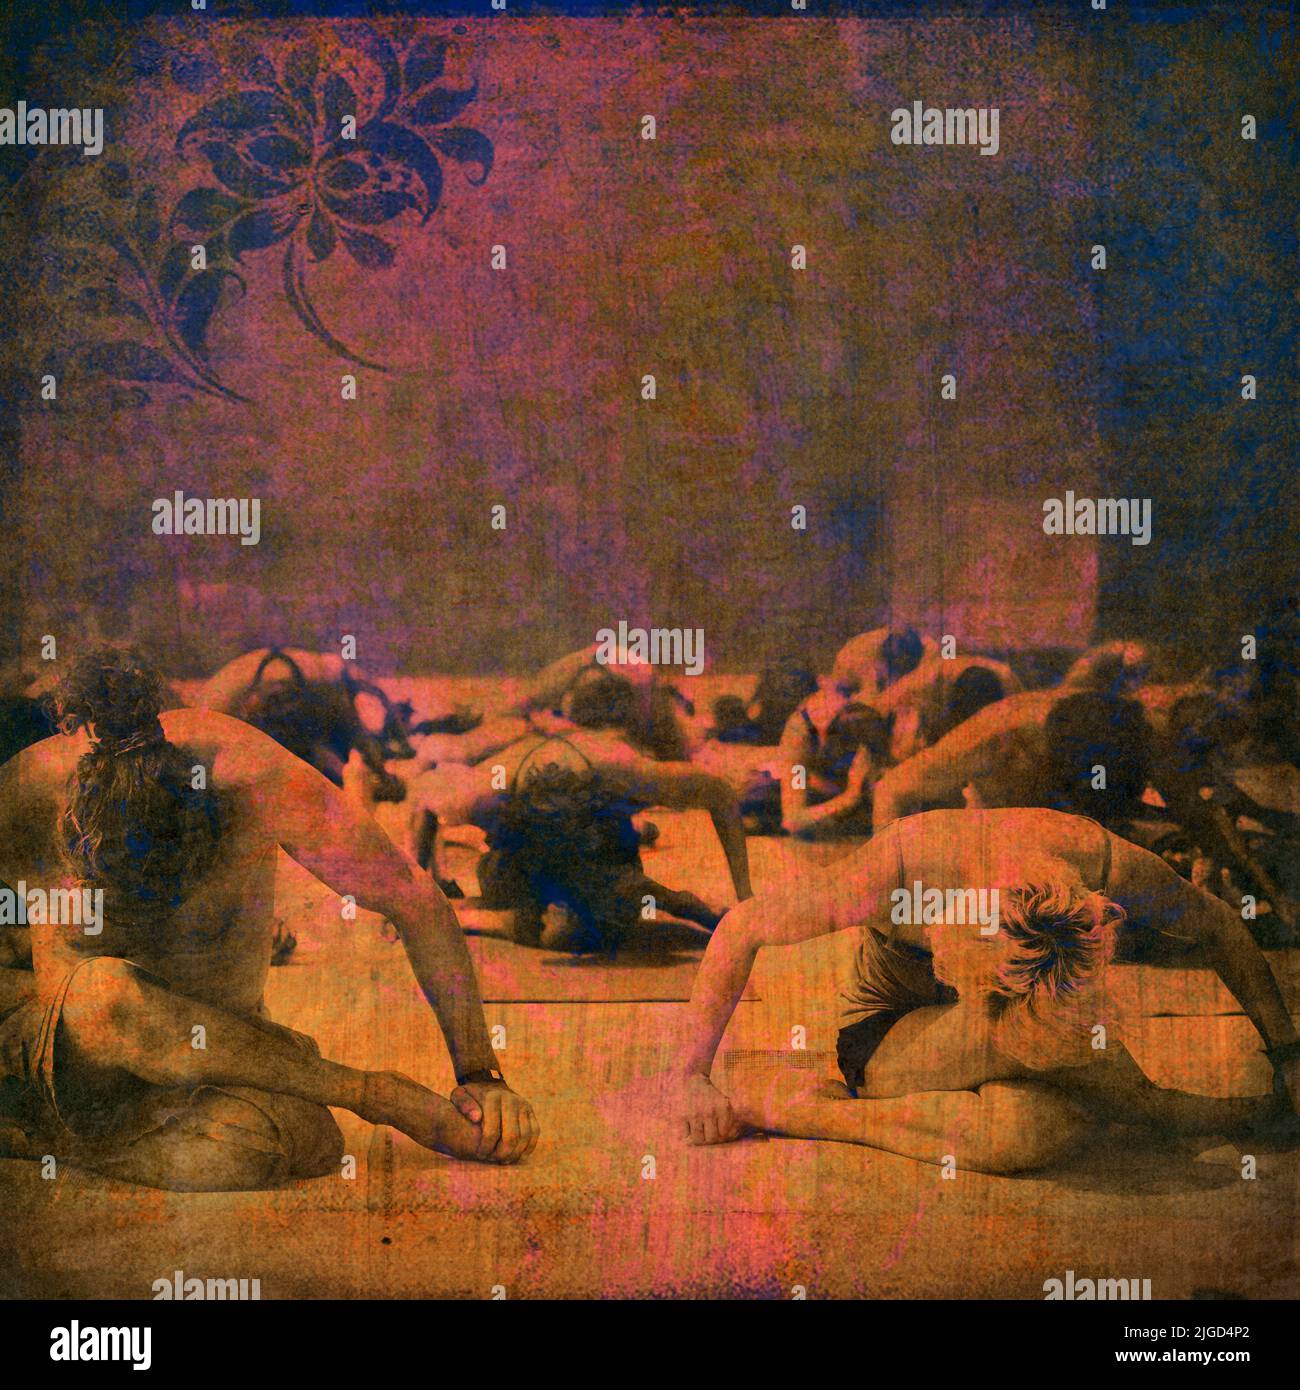 People in a seated yoga posture in a group class. Photo art with digital color staining and layered textures. Stock Photo